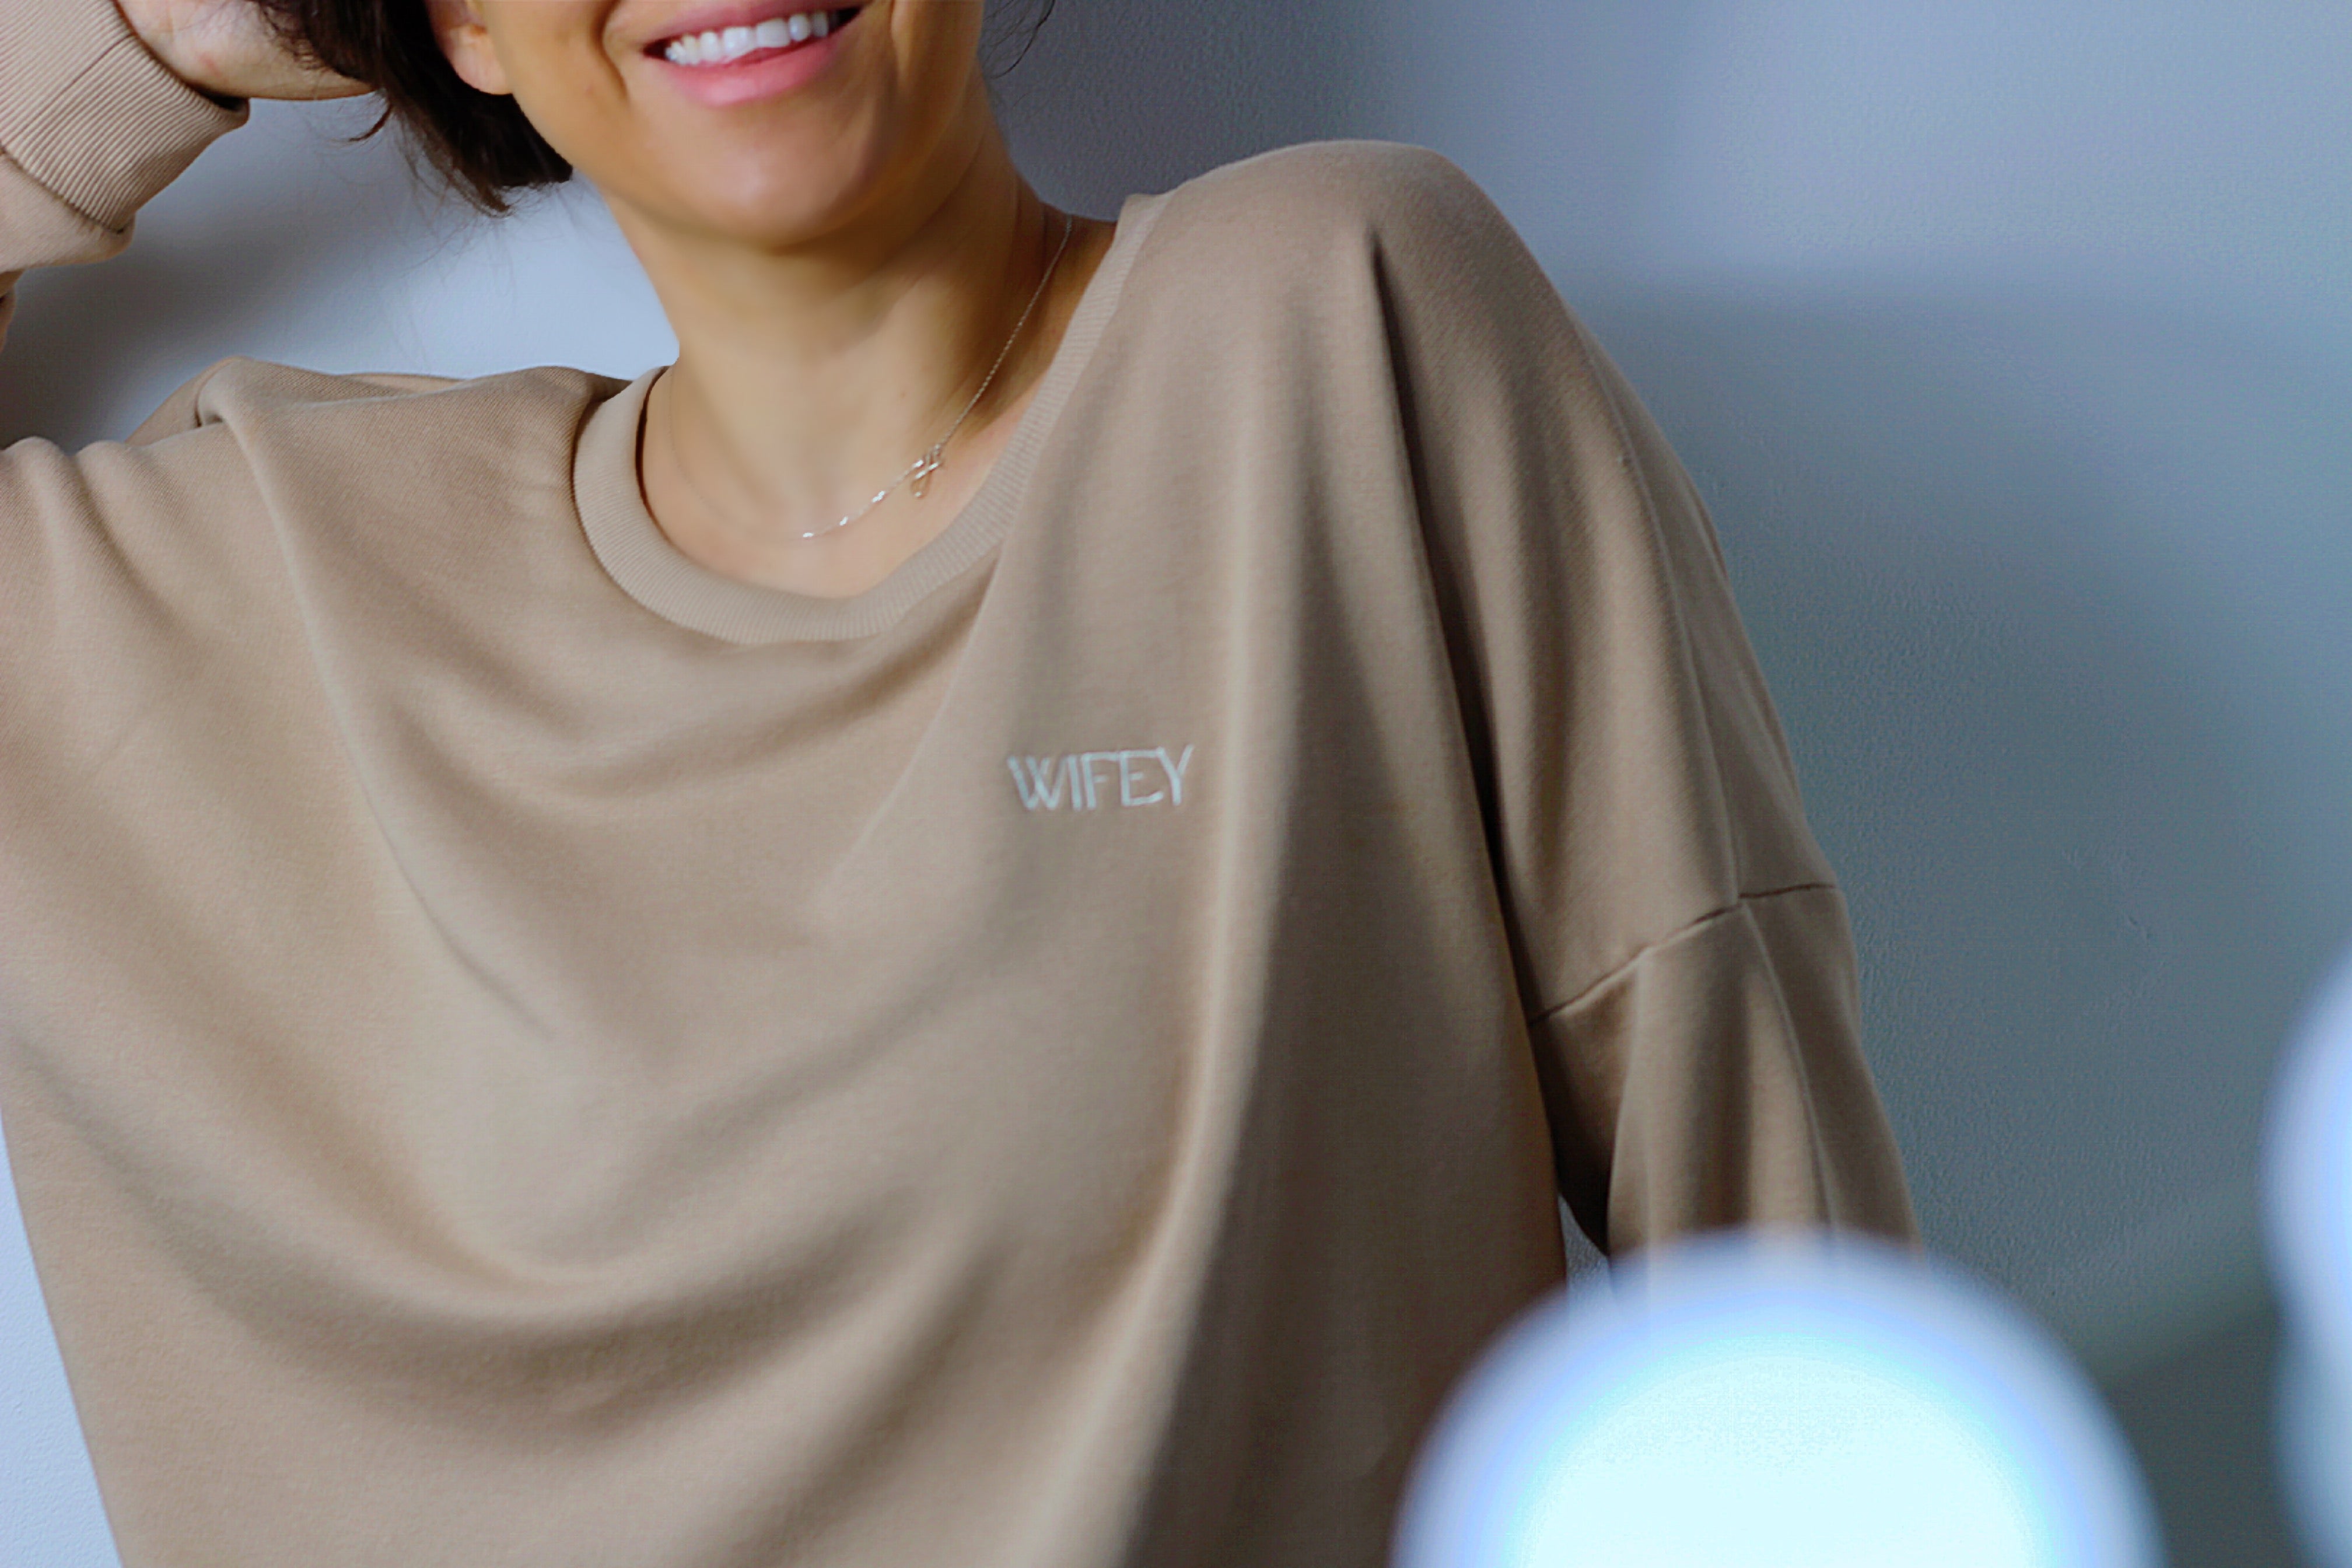 WIFEY embroidered Jumper